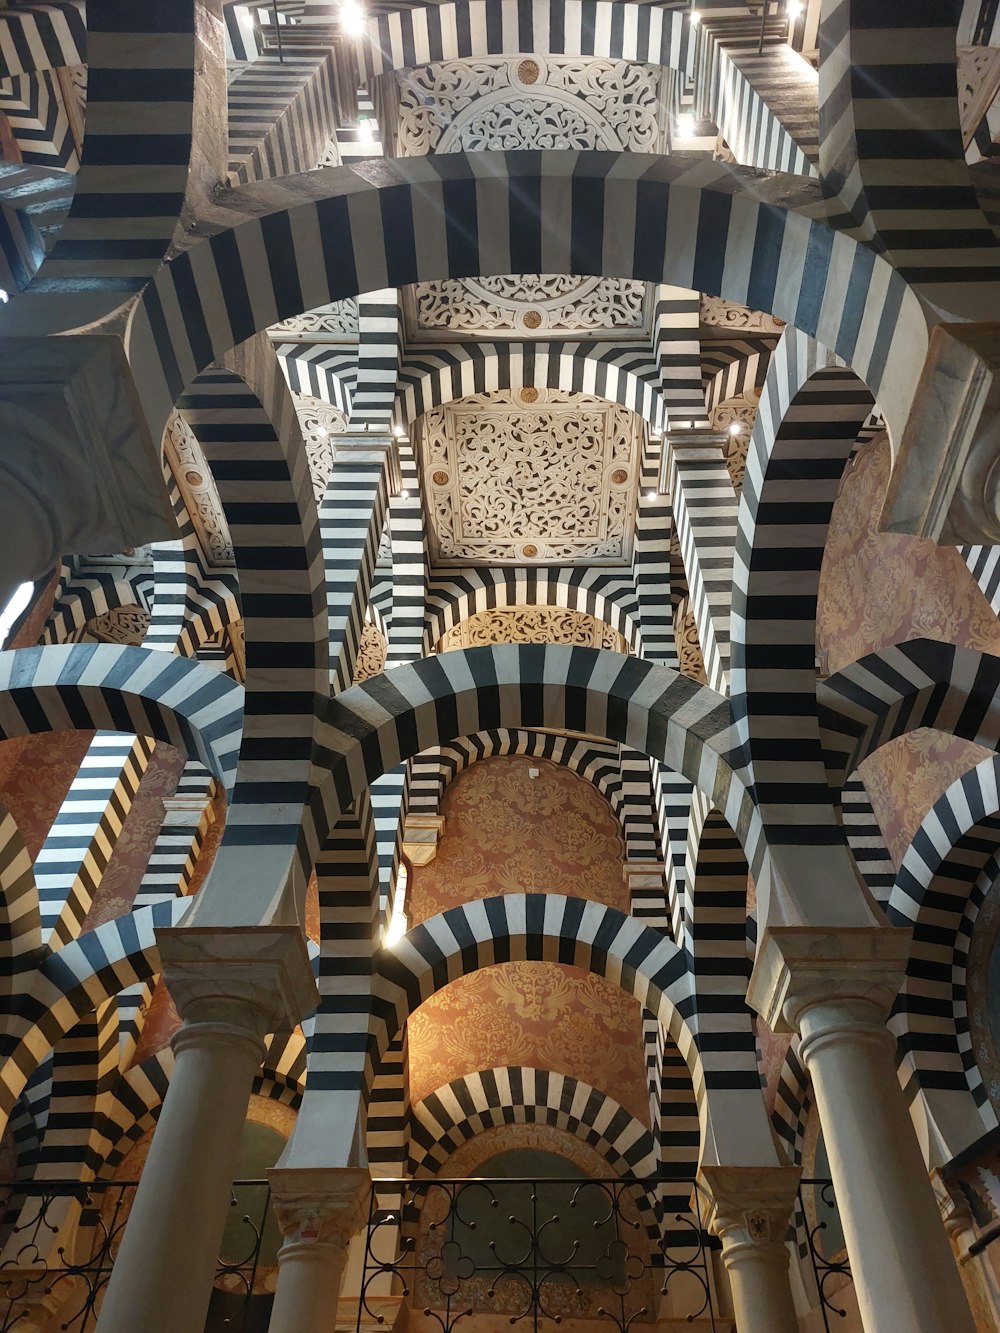 the ceiling of a building with black and white stripes